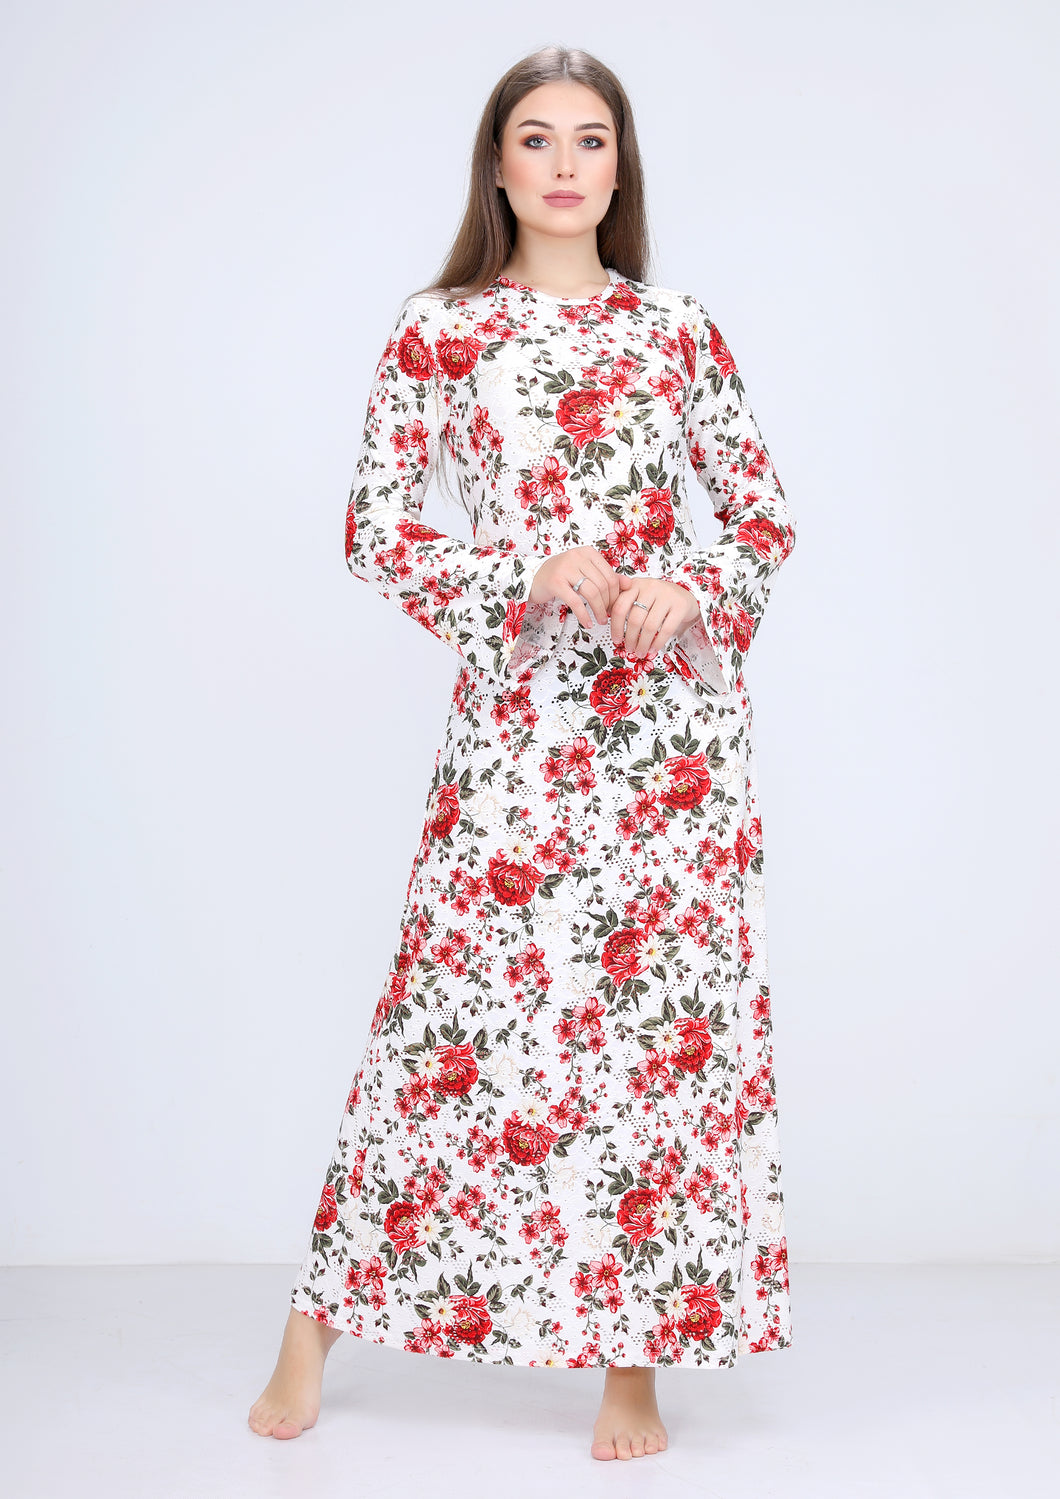 Long red floral dress